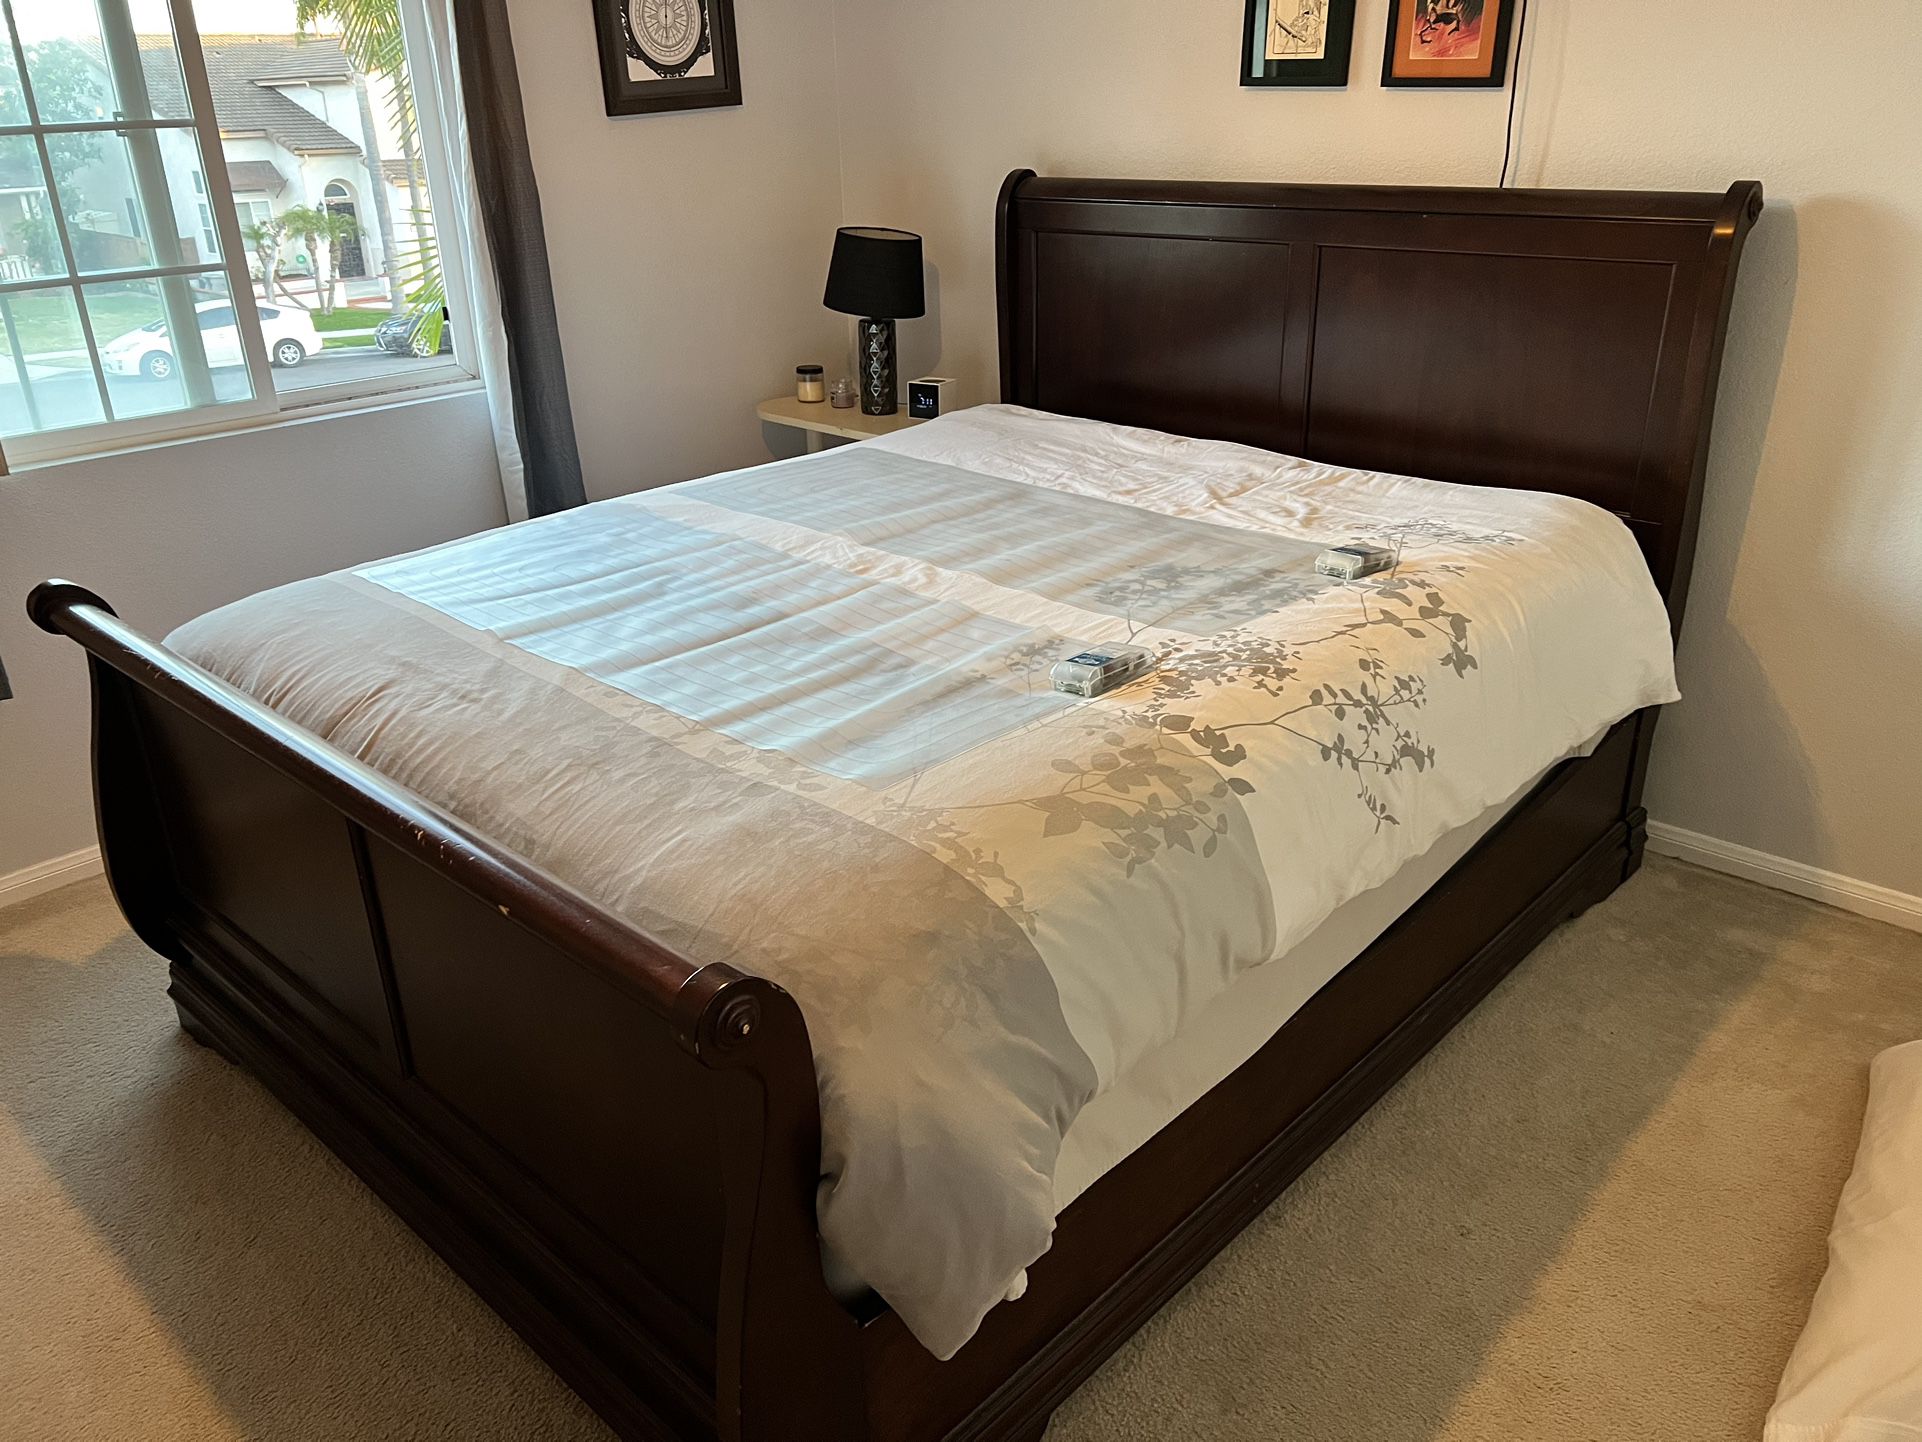 Queen Bed Frame(mattress Not Included)